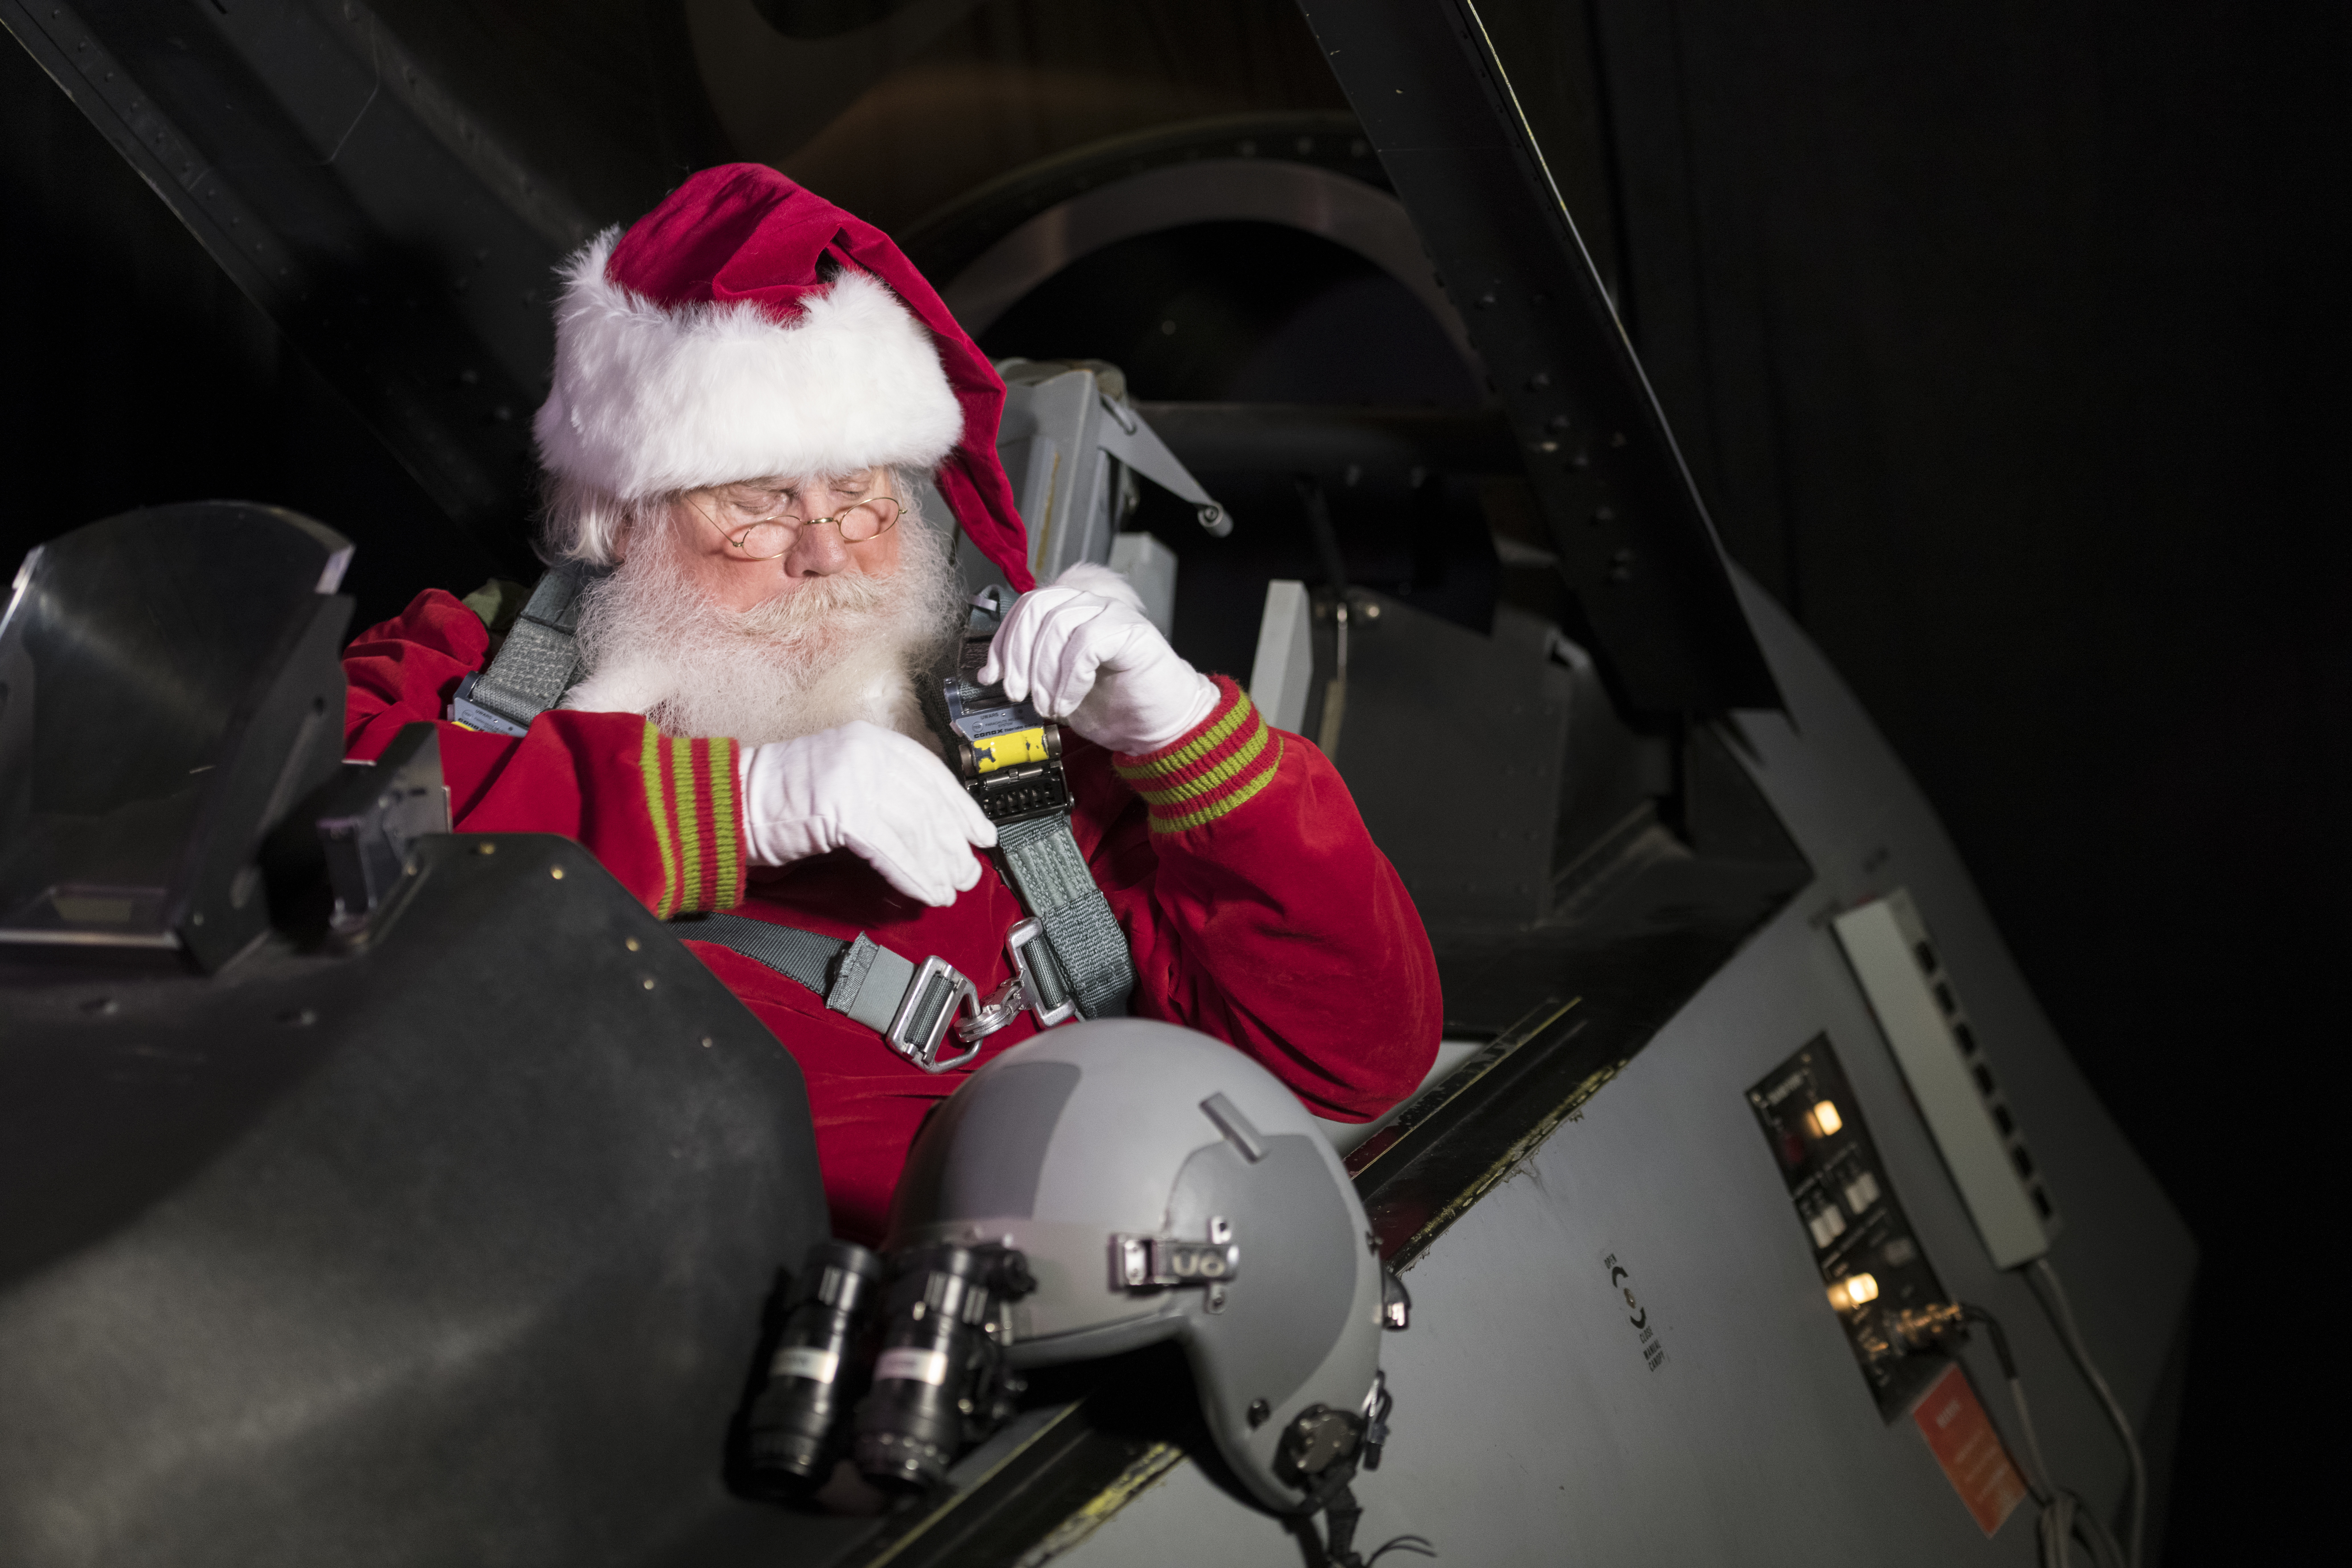 NORAD ready to track Santa's flight for 67th year > Air Force